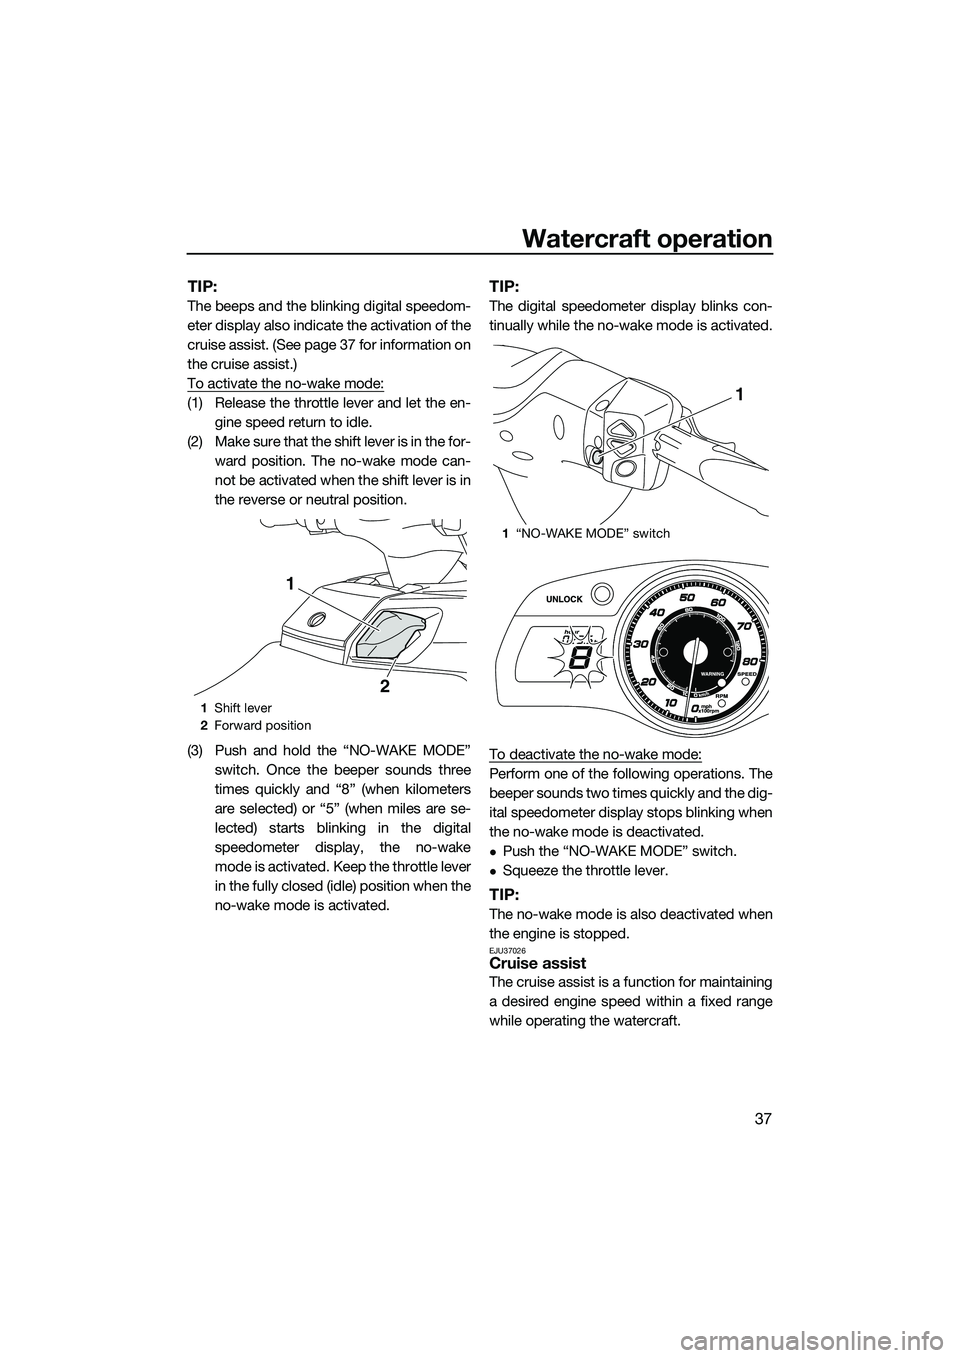 YAMAHA FX SVHO 2014  Owners Manual Watercraft operation
37
TIP:
The beeps and the blinking digital speedom-
eter display also indicate the activation of the
cruise assist. (See page 37 for information on
the cruise assist.)
To activate